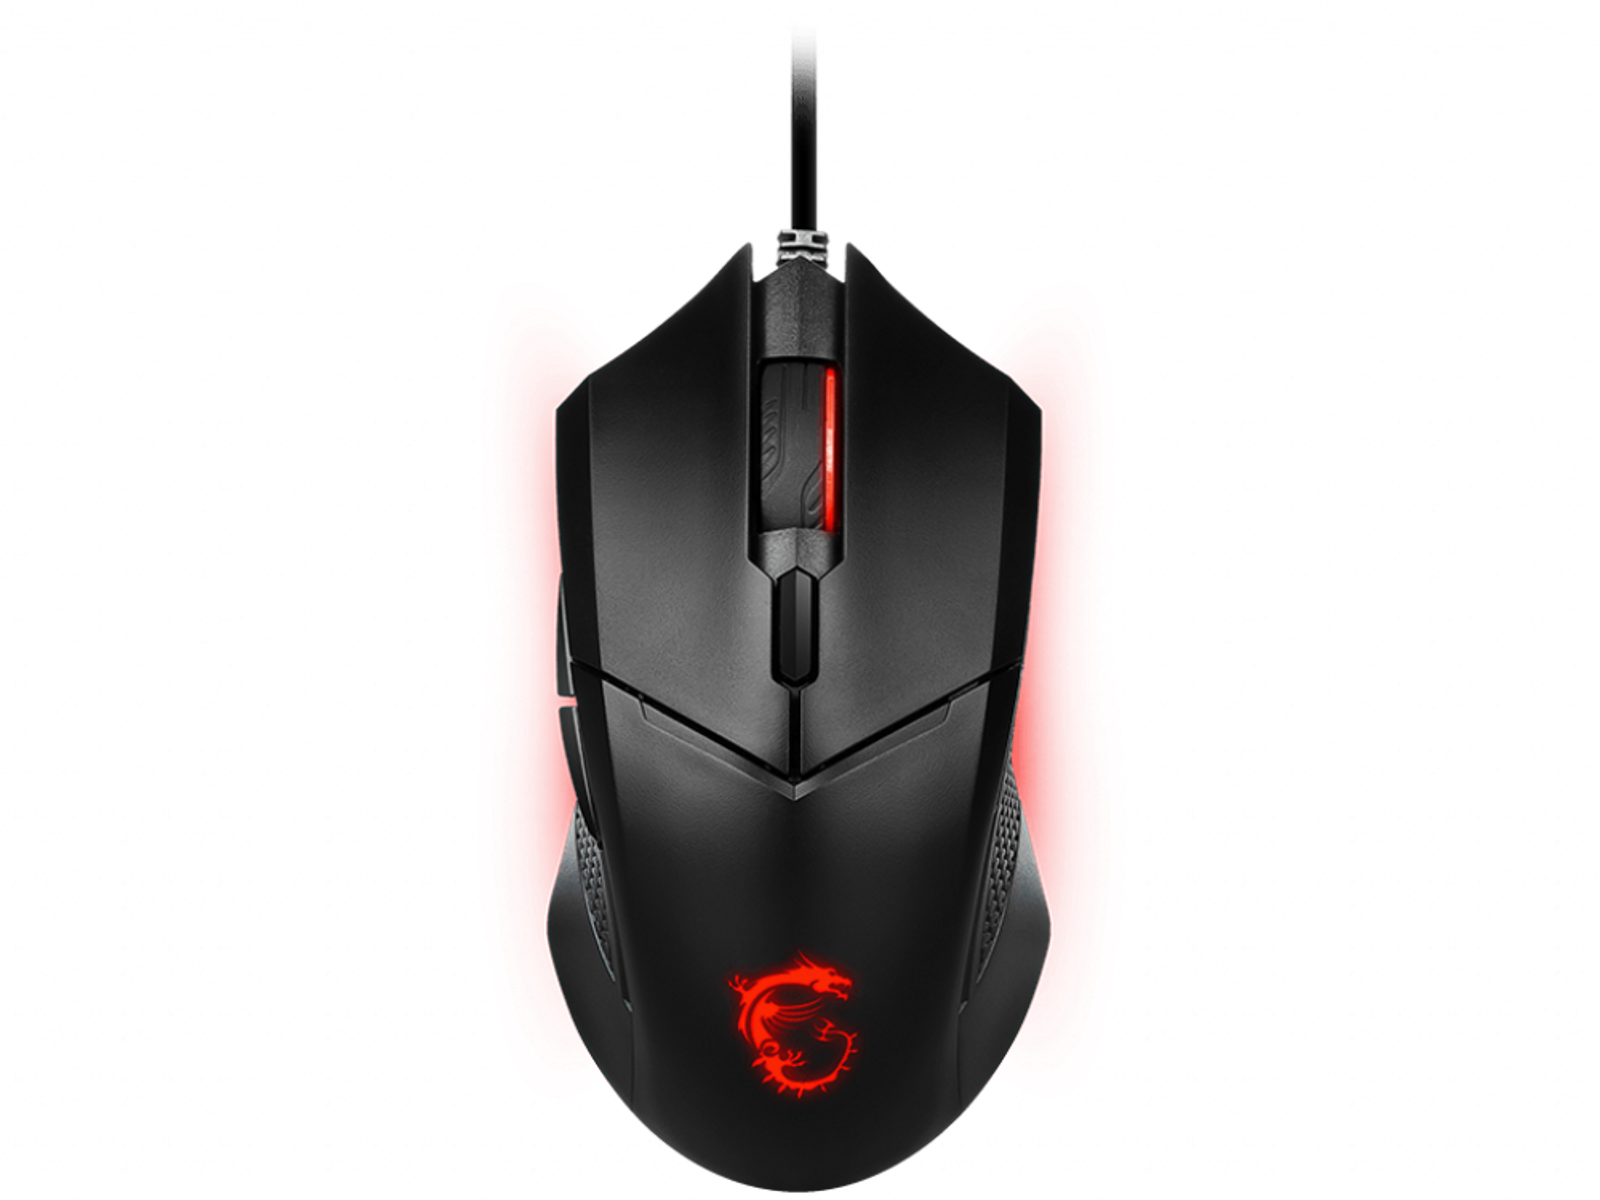 MOUSE GM08 GAMING CLUTCH S12-0401800-CLA Gaming-Maus, Schwarz MSI